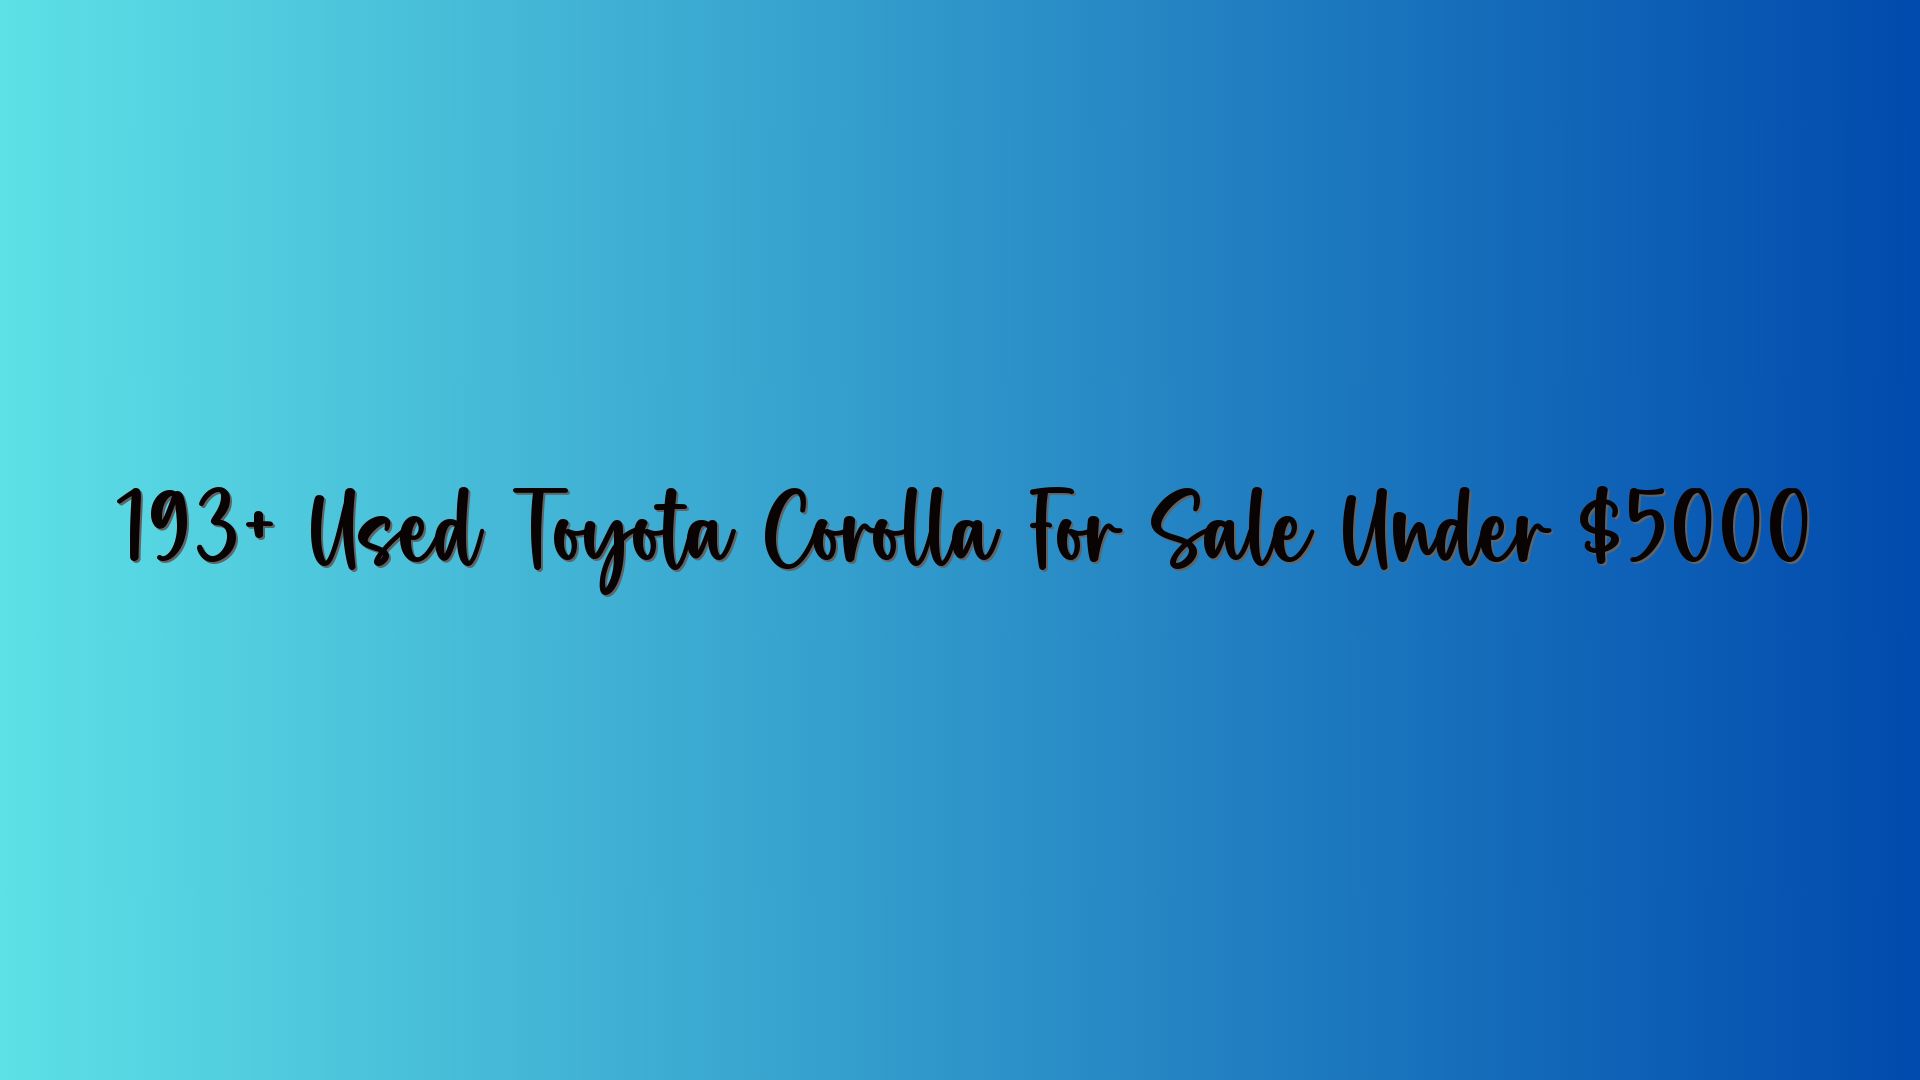 193+ Used Toyota Corolla For Sale Under $5000